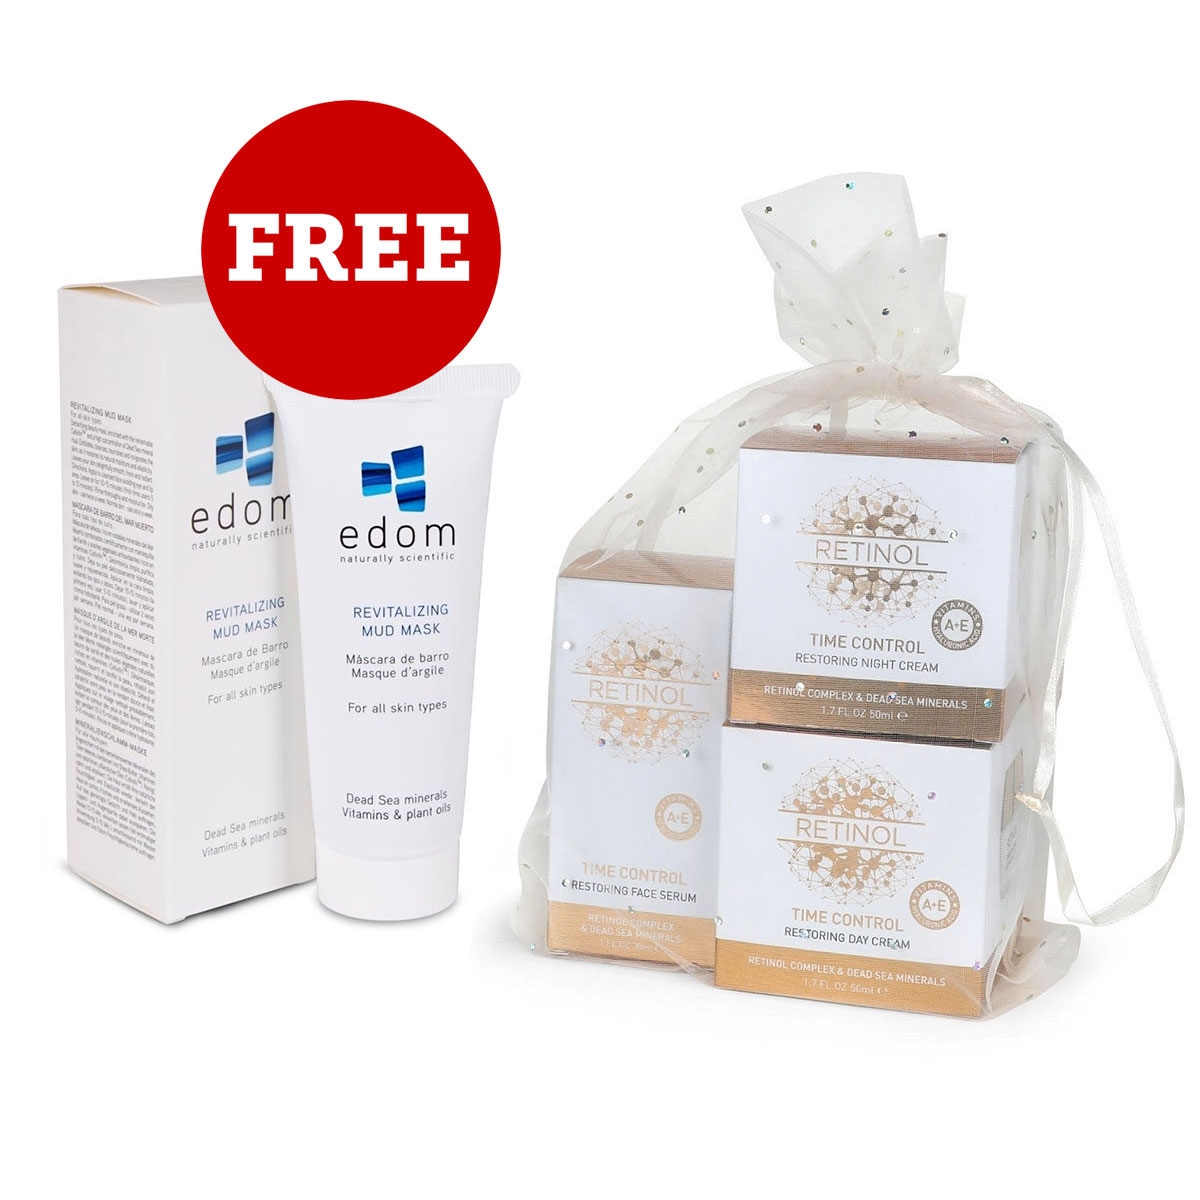 Edom Facial Set - Buy This Set of Three Skin Creams and Get Revitalizing Mud Mask For FREE!!! - 1